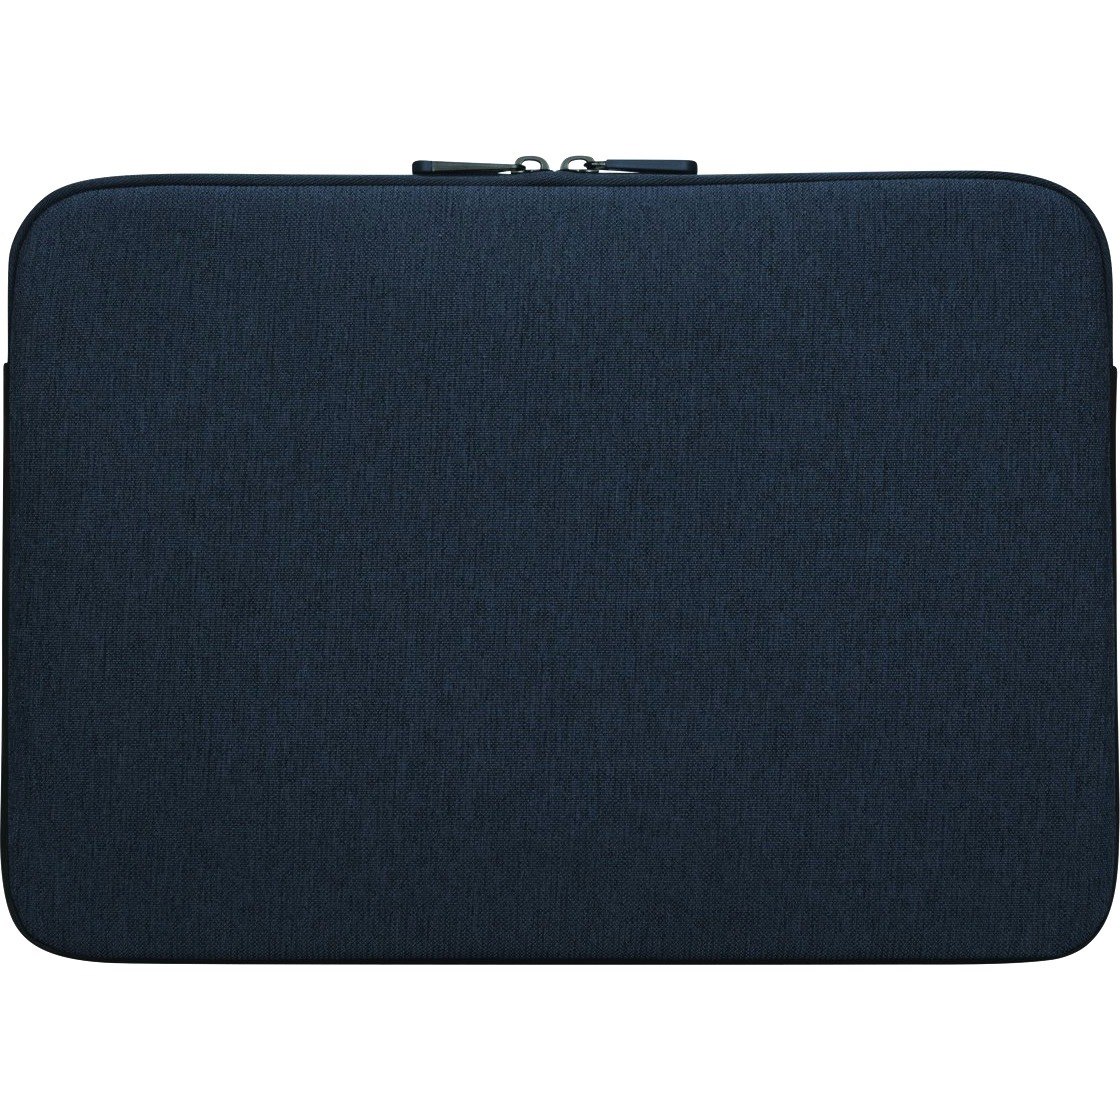 Targus Cypress TBS64901GL Carrying Case (Sleeve) for 27.9 cm (11") to 30.5 cm (12") Notebook - Navy